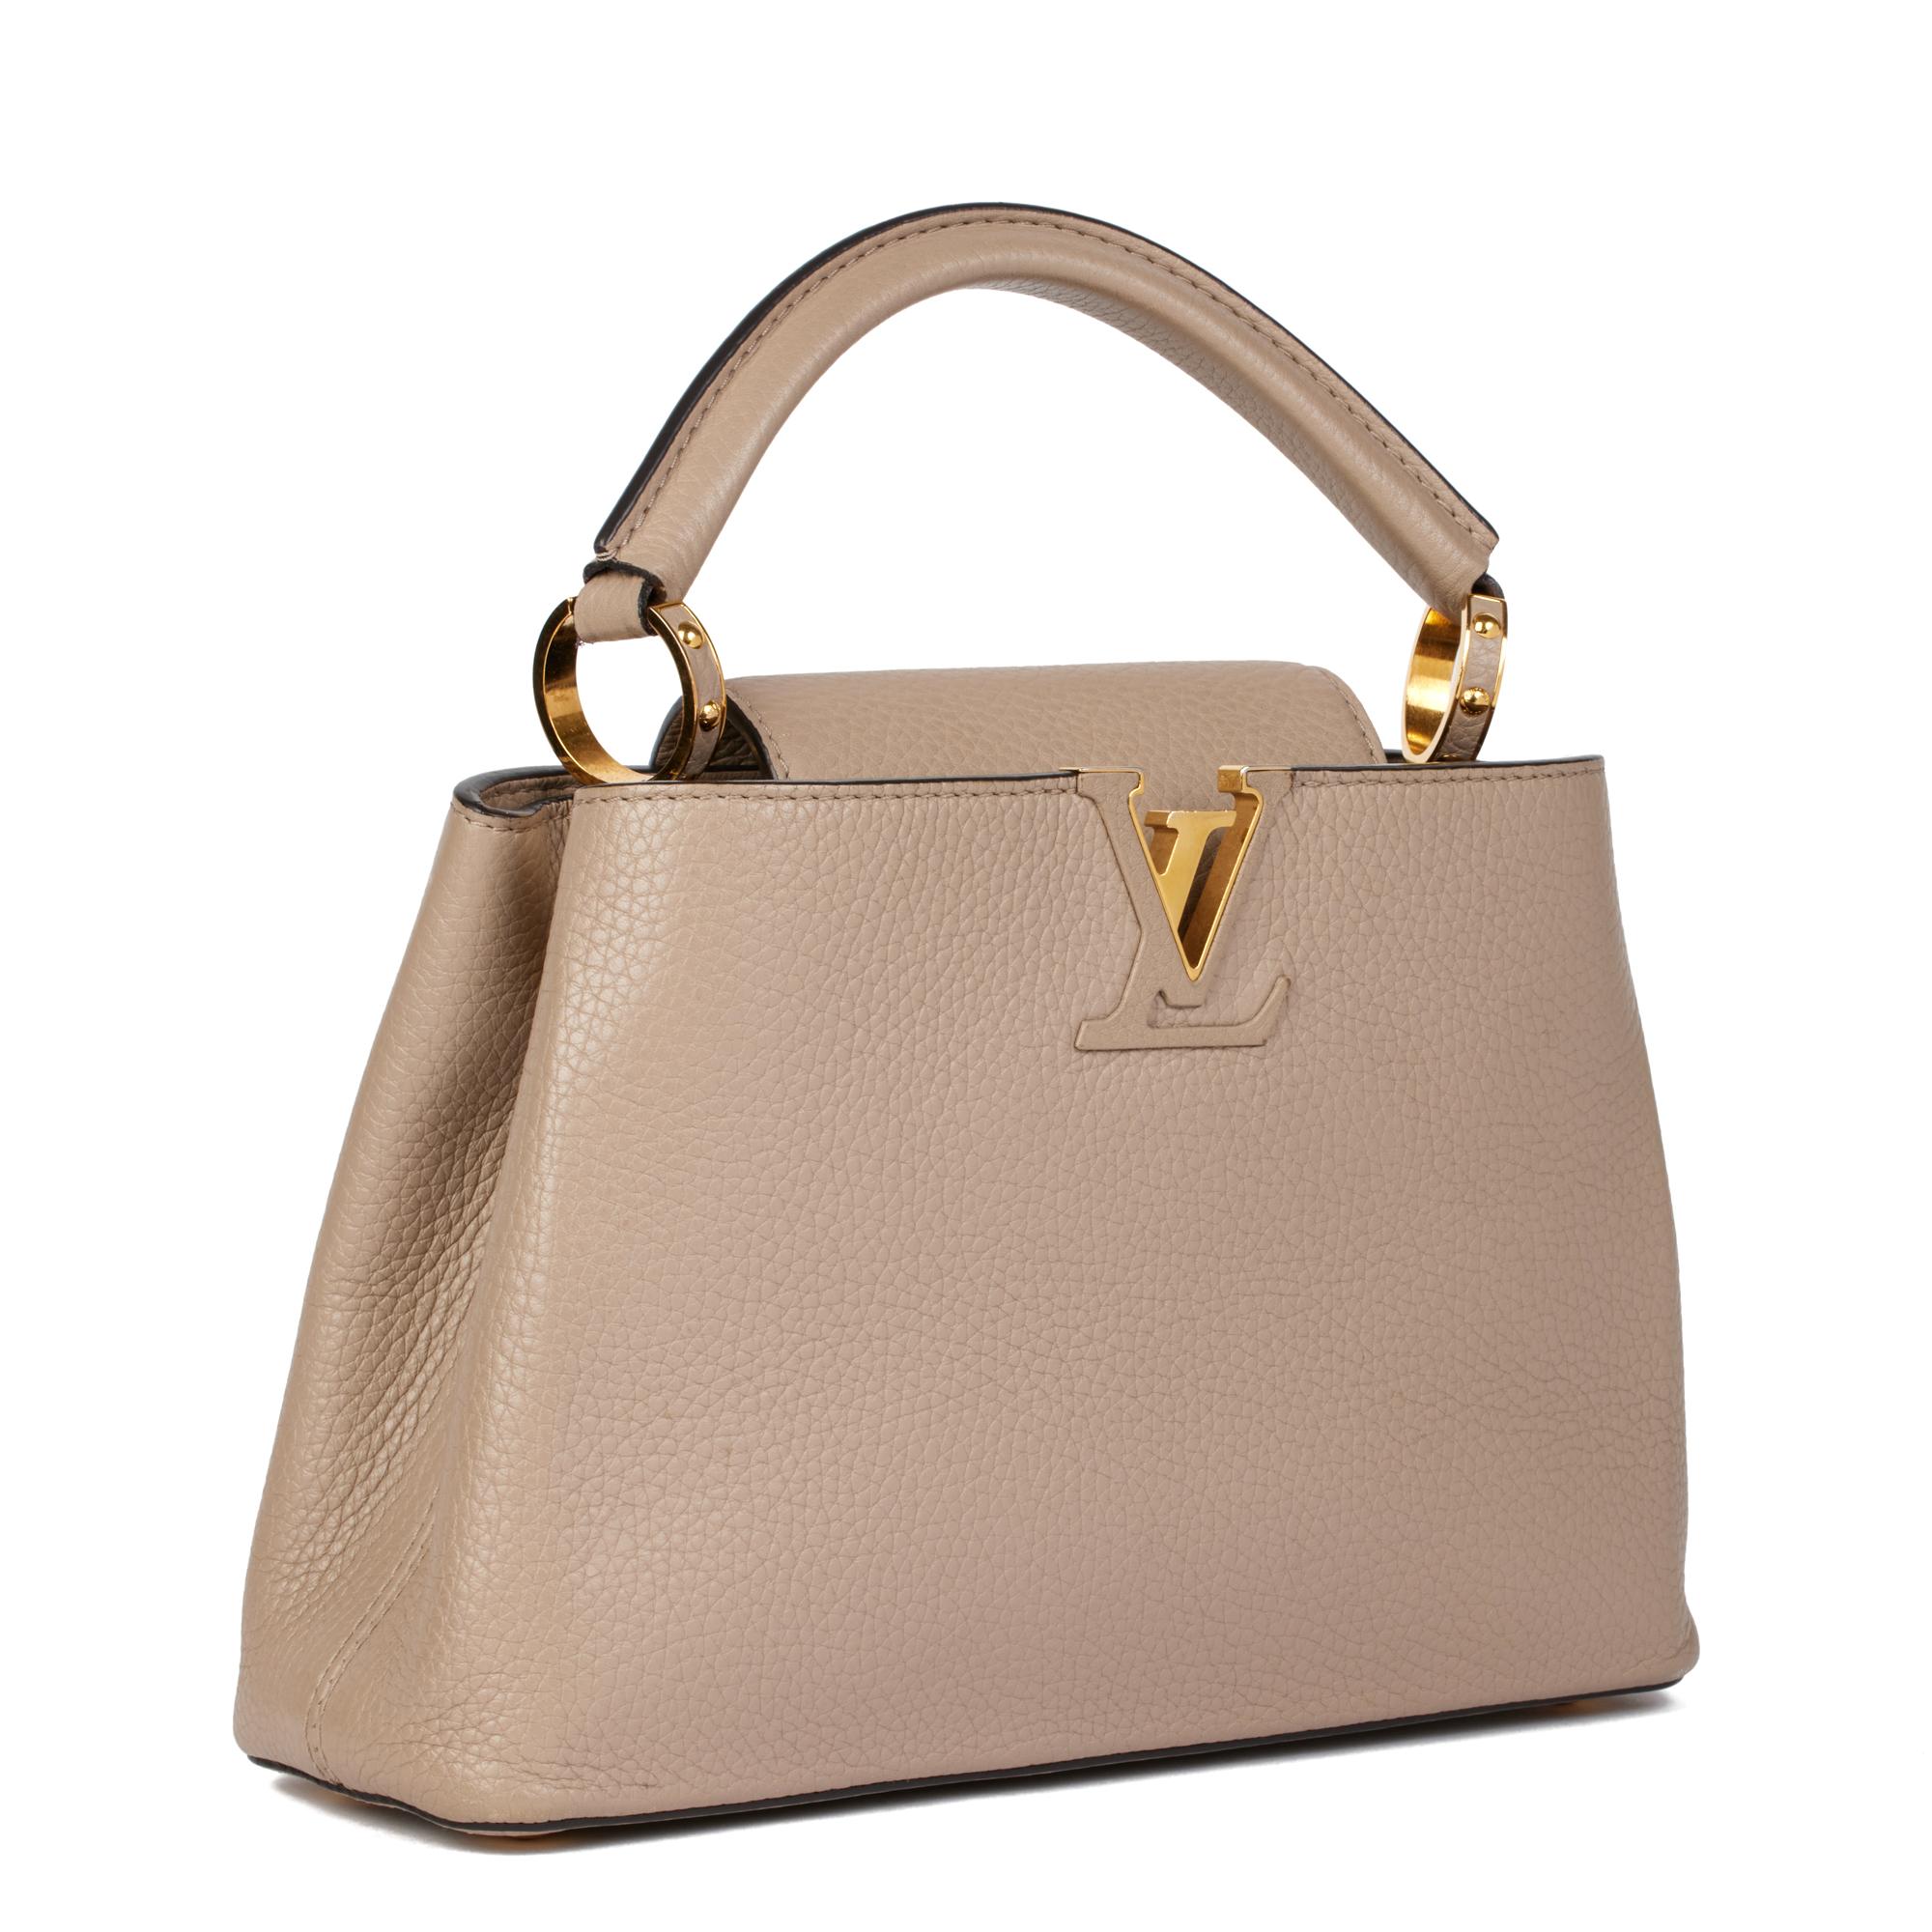 LOUIS VUITTON
Galet Taurillion Leather Capucines BB

Serial Number: MI 2145
Age (Circa): 2015
Accompanied By: Louis Vuitton Dust Bag, Shoulder Strap
Authenticity Details: Date Stamp (Made in France)
Gender: Ladies
Type: Top Handle. Shoulder,